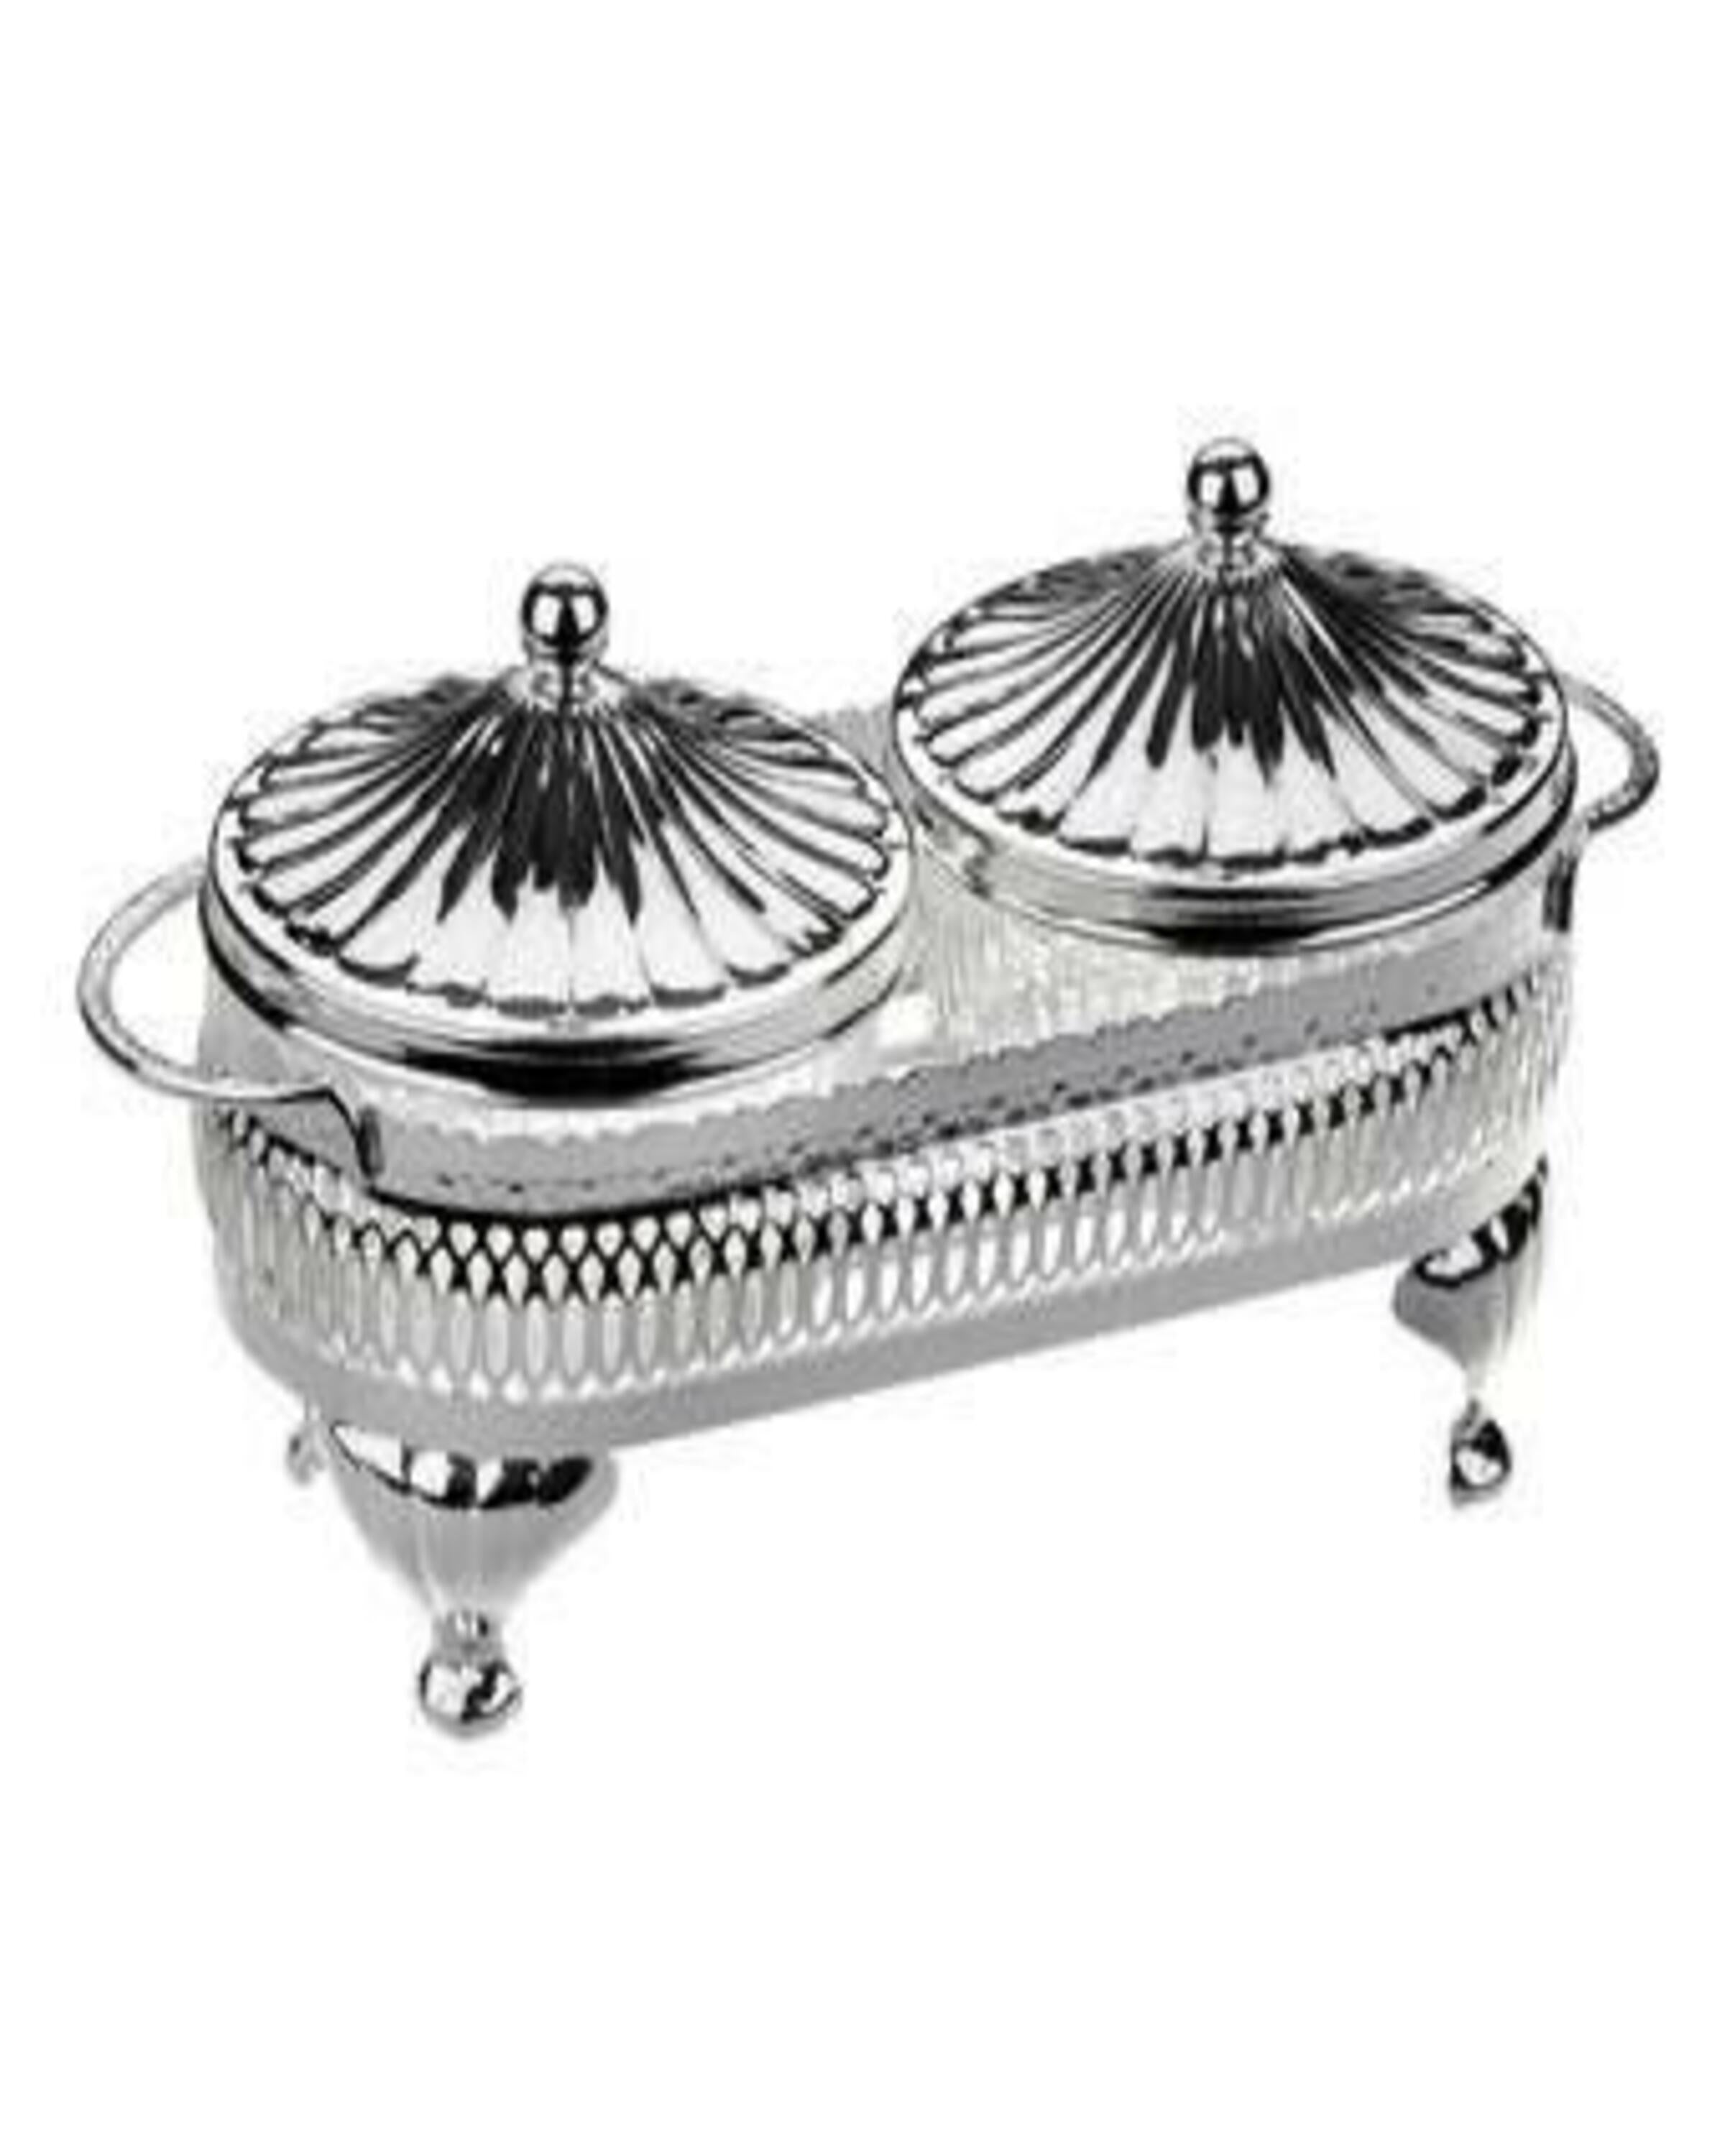 Luxury Hot Dish Silver Plated